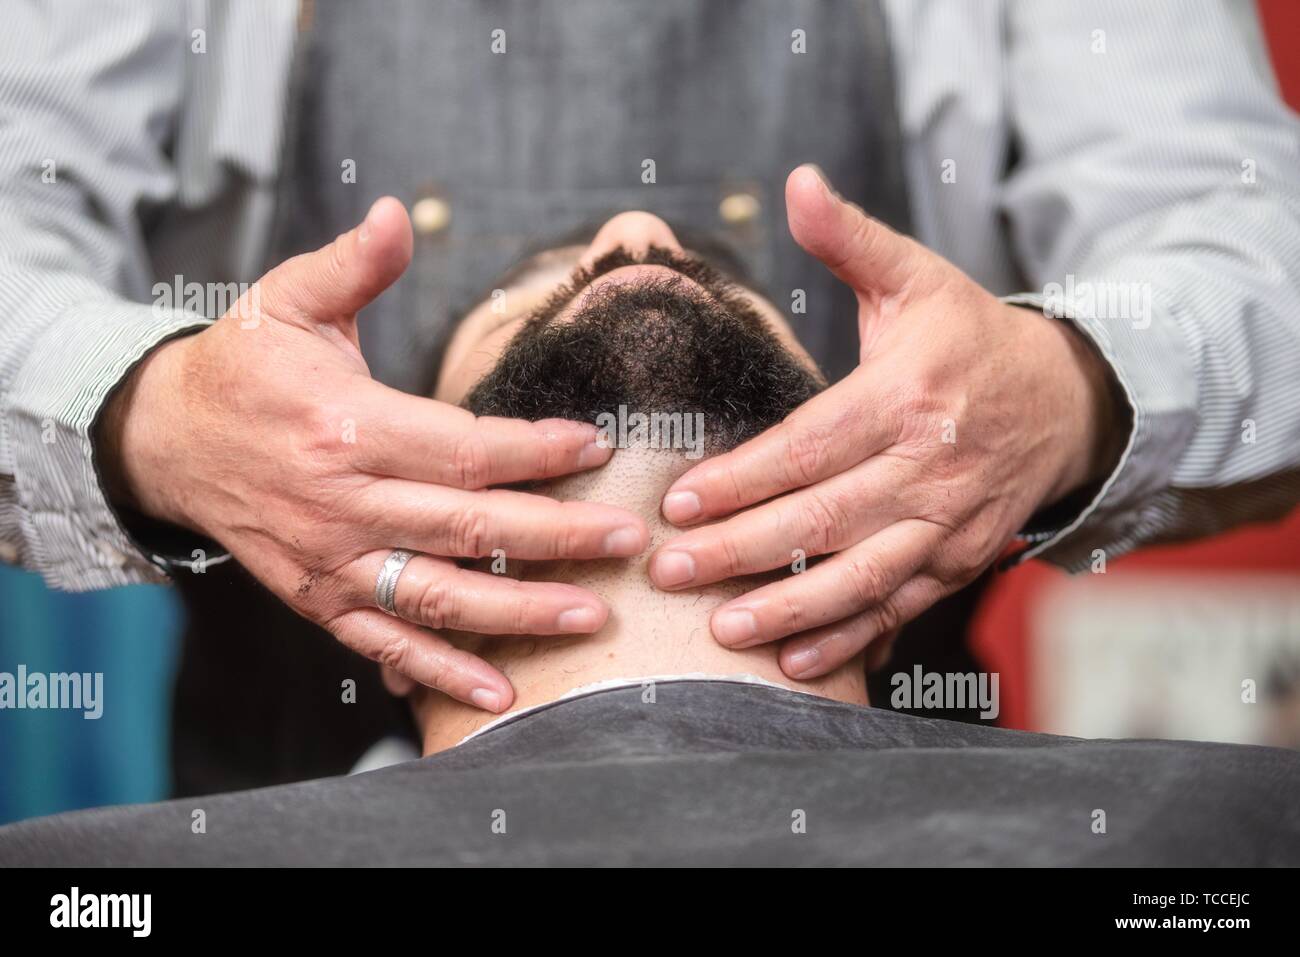 Hair stylist applying after shaving lotion at barber shop. Stock Photo